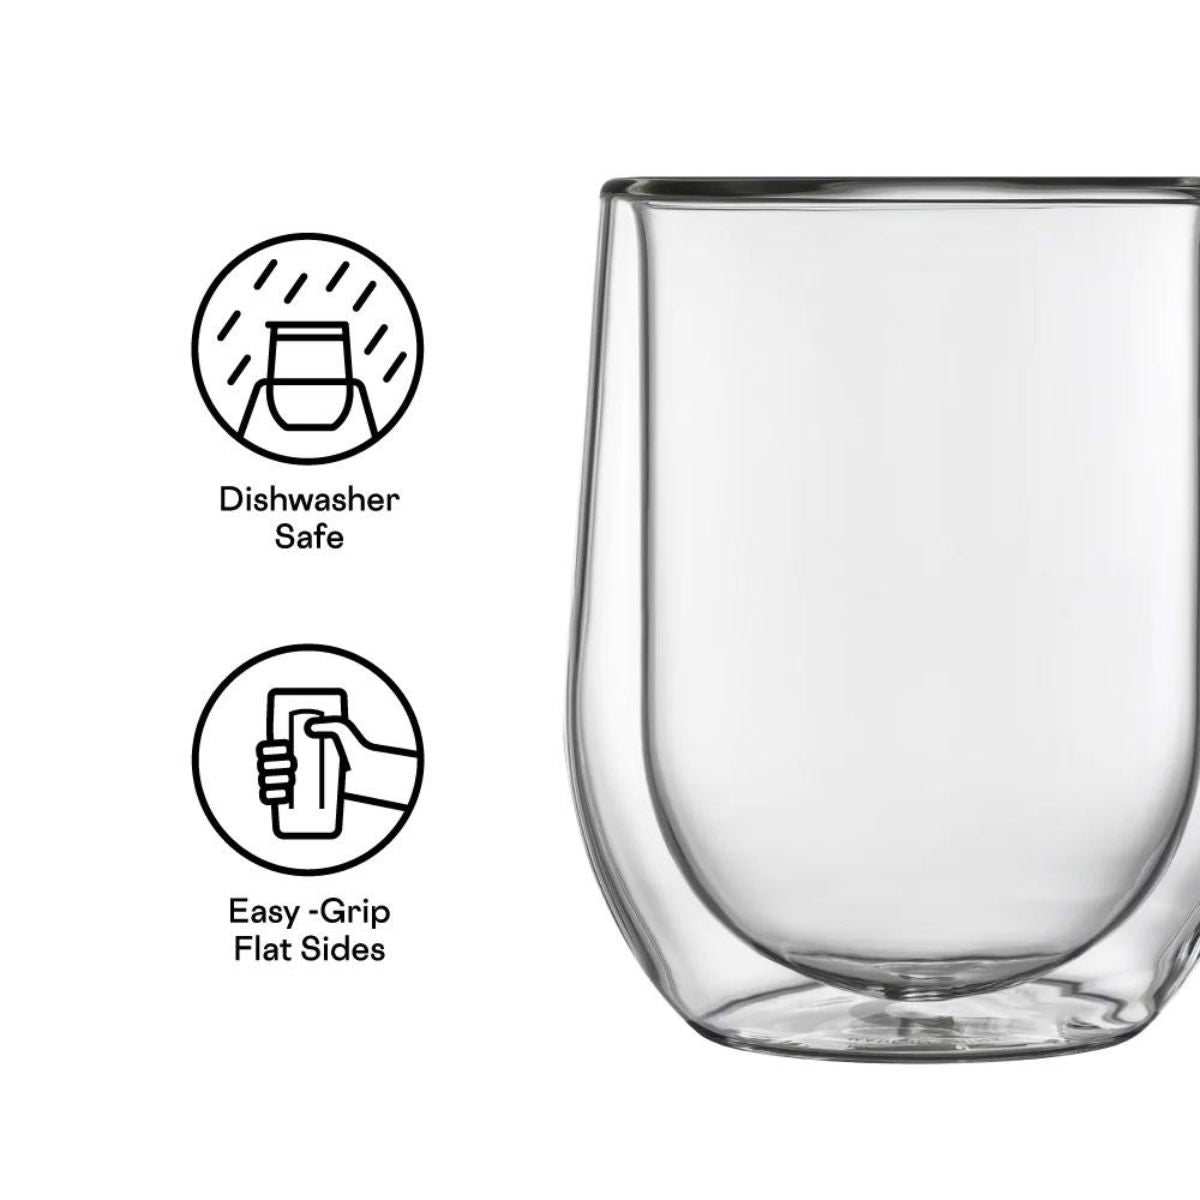 Corkcicle Glass Stemless Double Pack